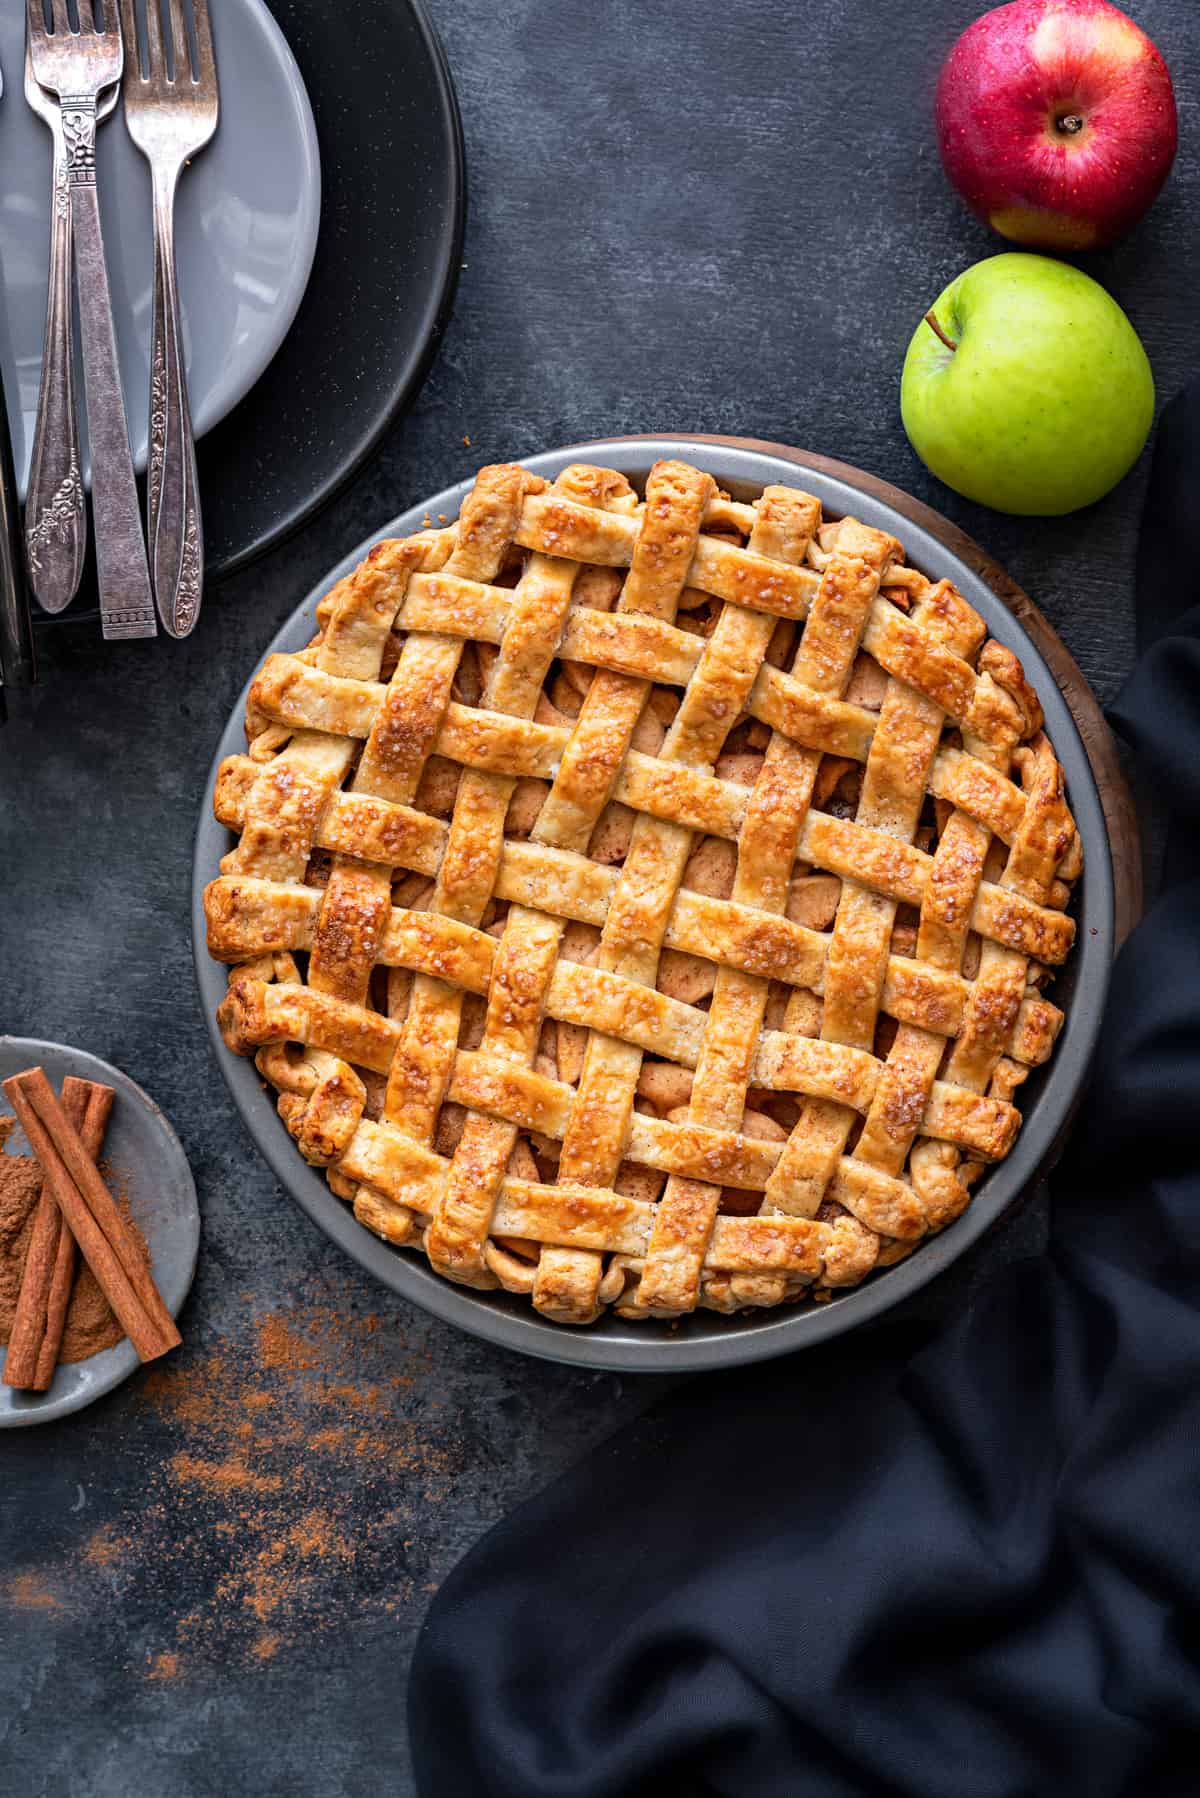 Overhead shot of a large apple pie with a woven-looking crust in a dish.